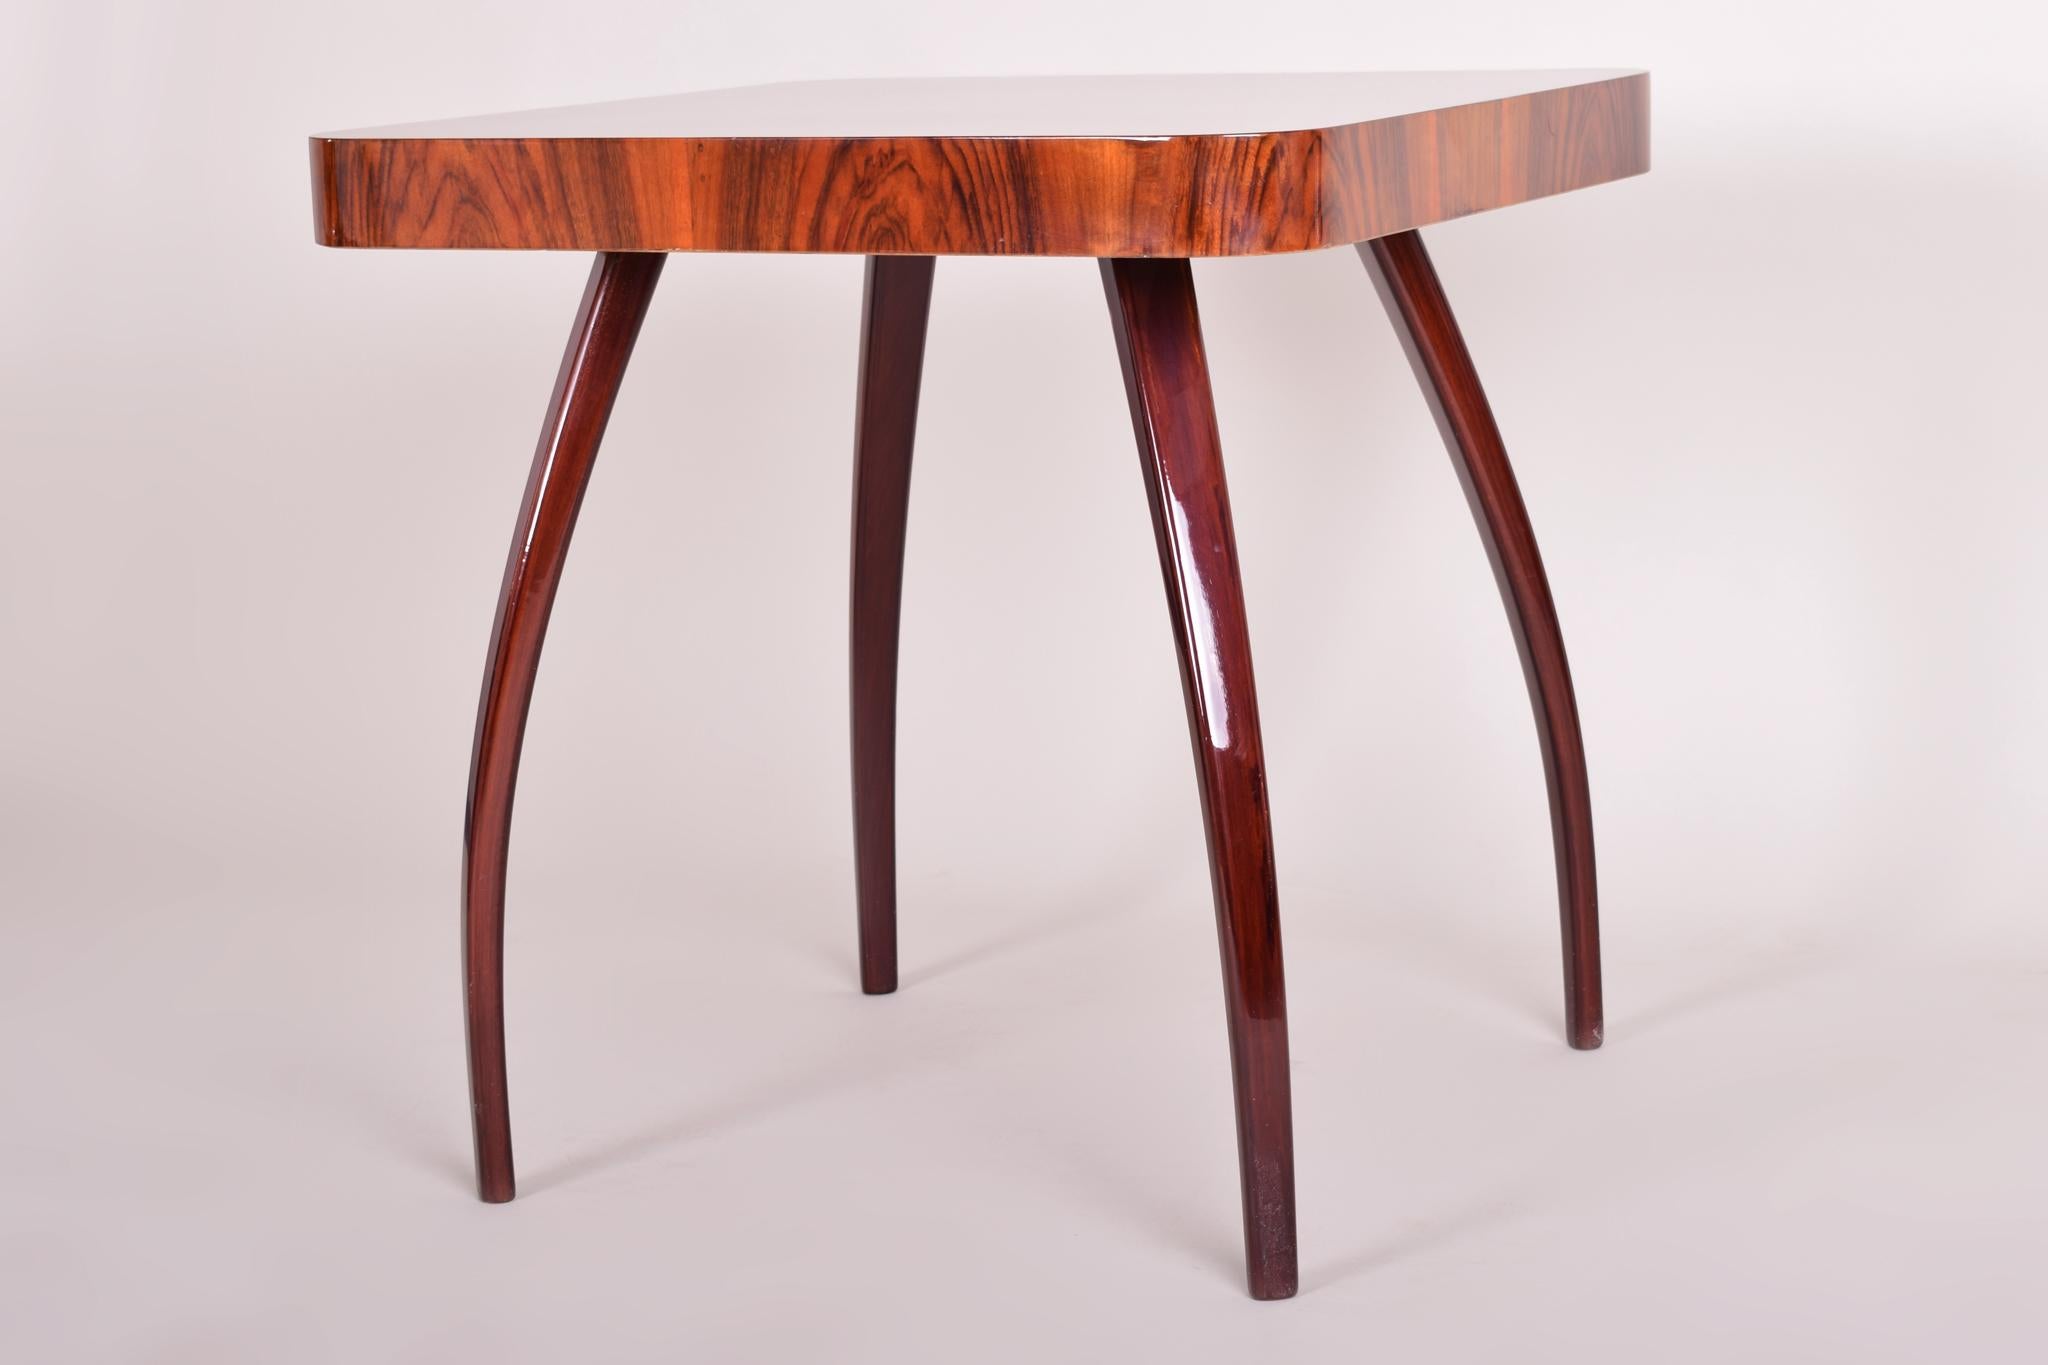 Art Deco Small Brown Pavóuk Table, Designed by Halabala, 1940s, Made in Czechia For Sale